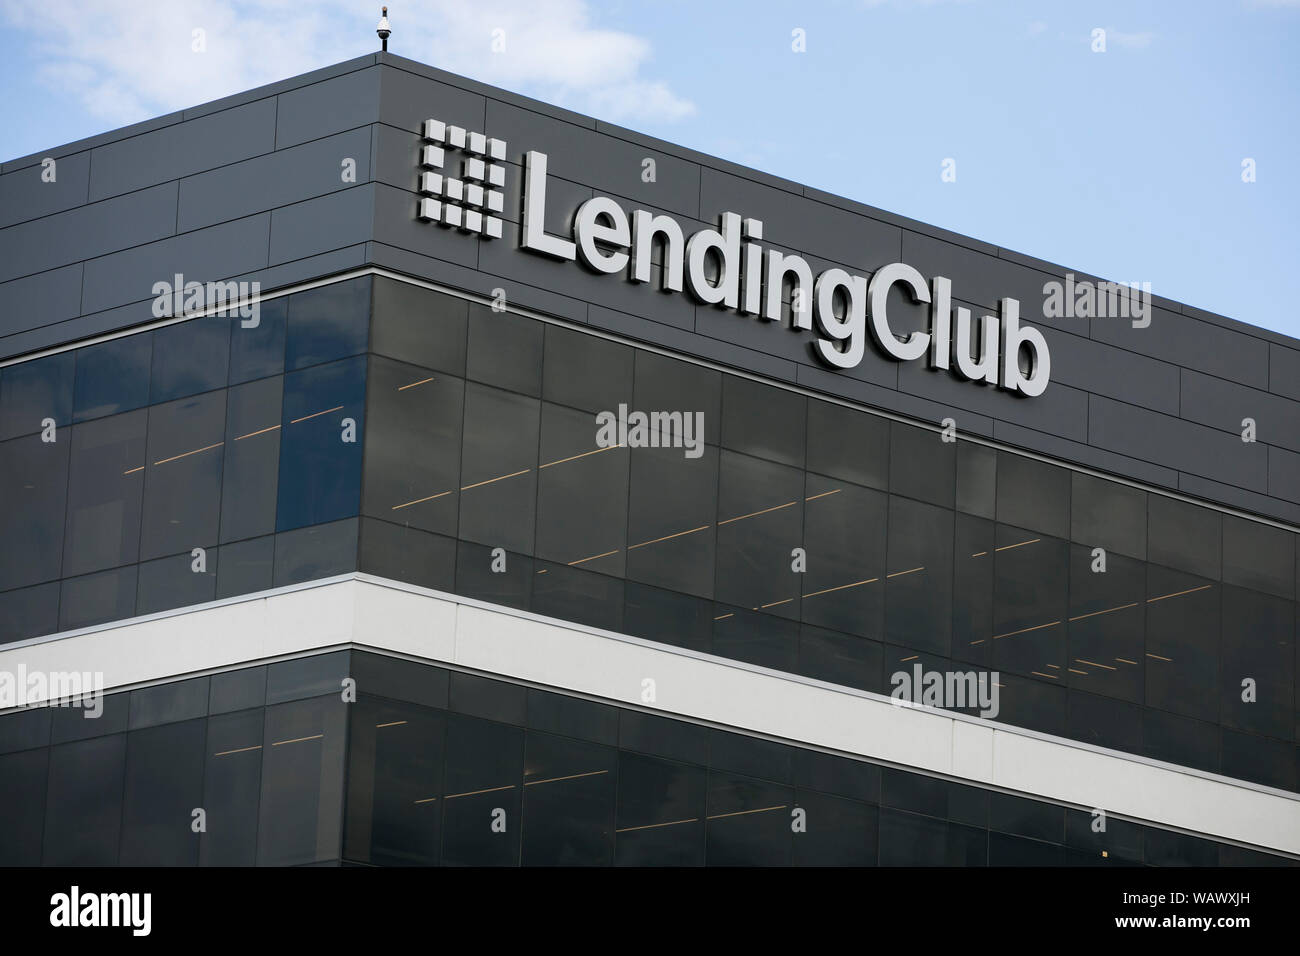 A logo sign outside of a facility occupied by Lending Club in Lehi, Utah on July 27, 2019. Stock Photo